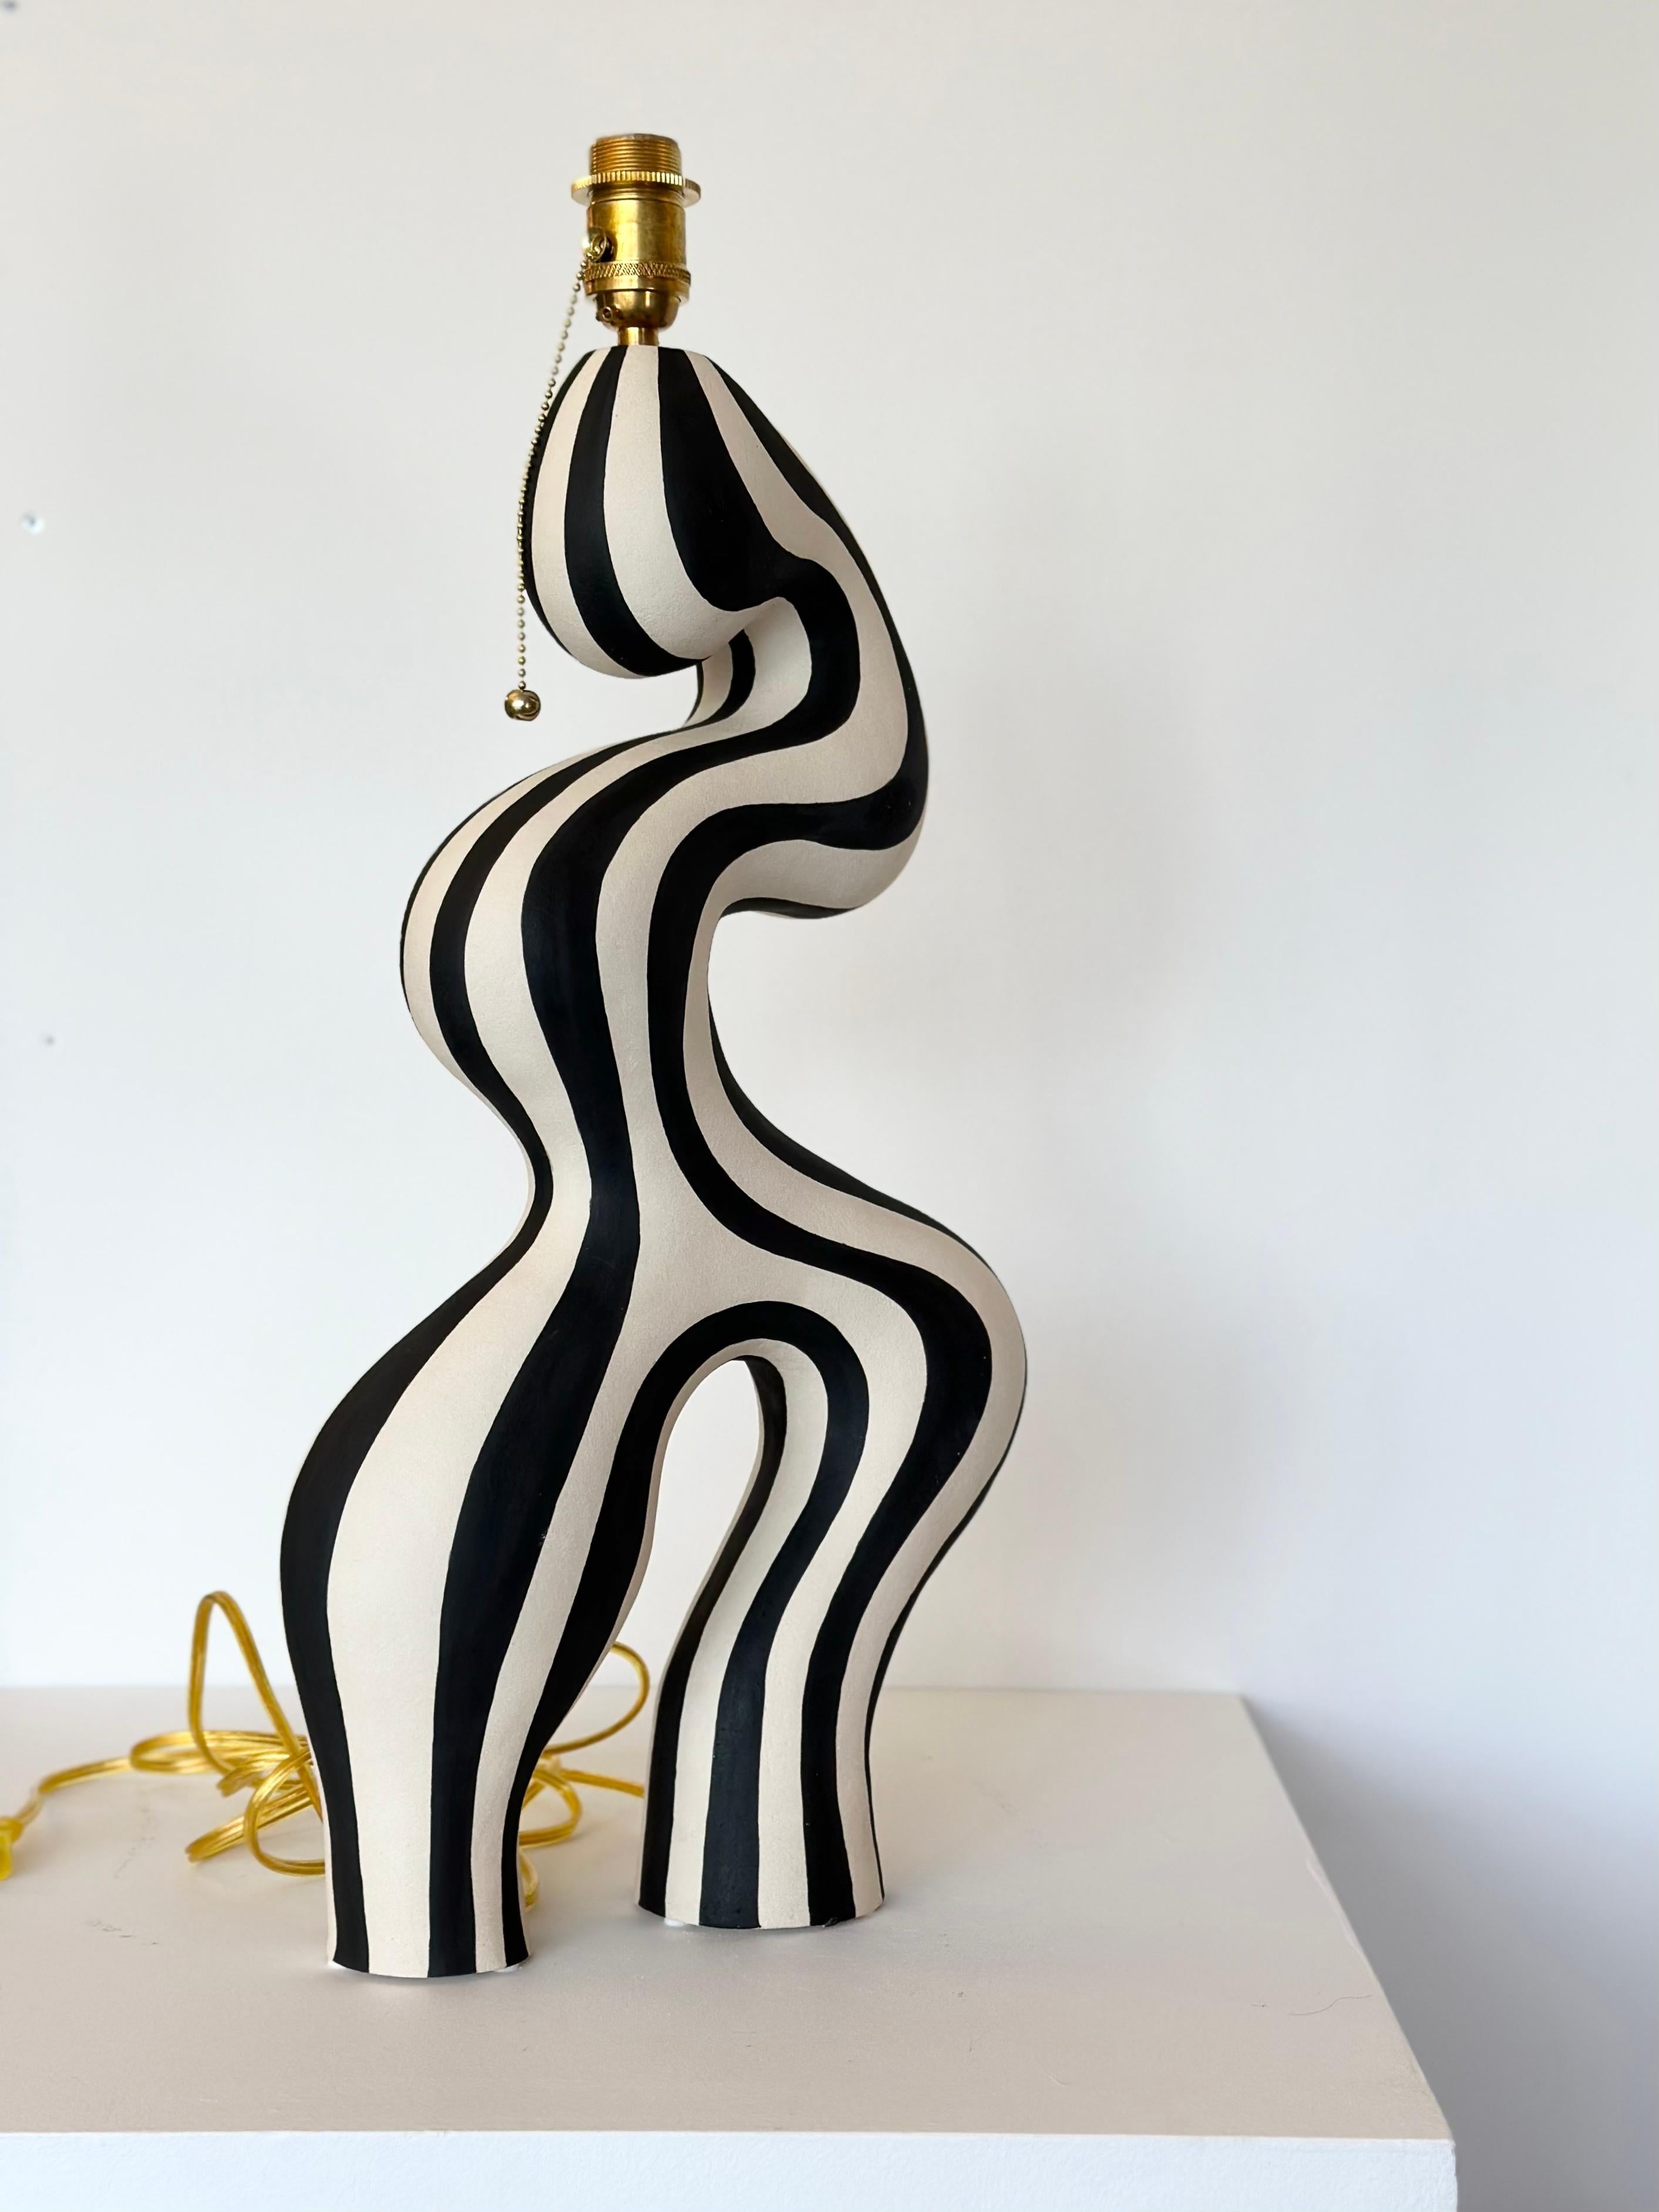 Hand-Crafted Crafted by hand: ceramic table lamp by Norwegian artist Jossolini For Sale